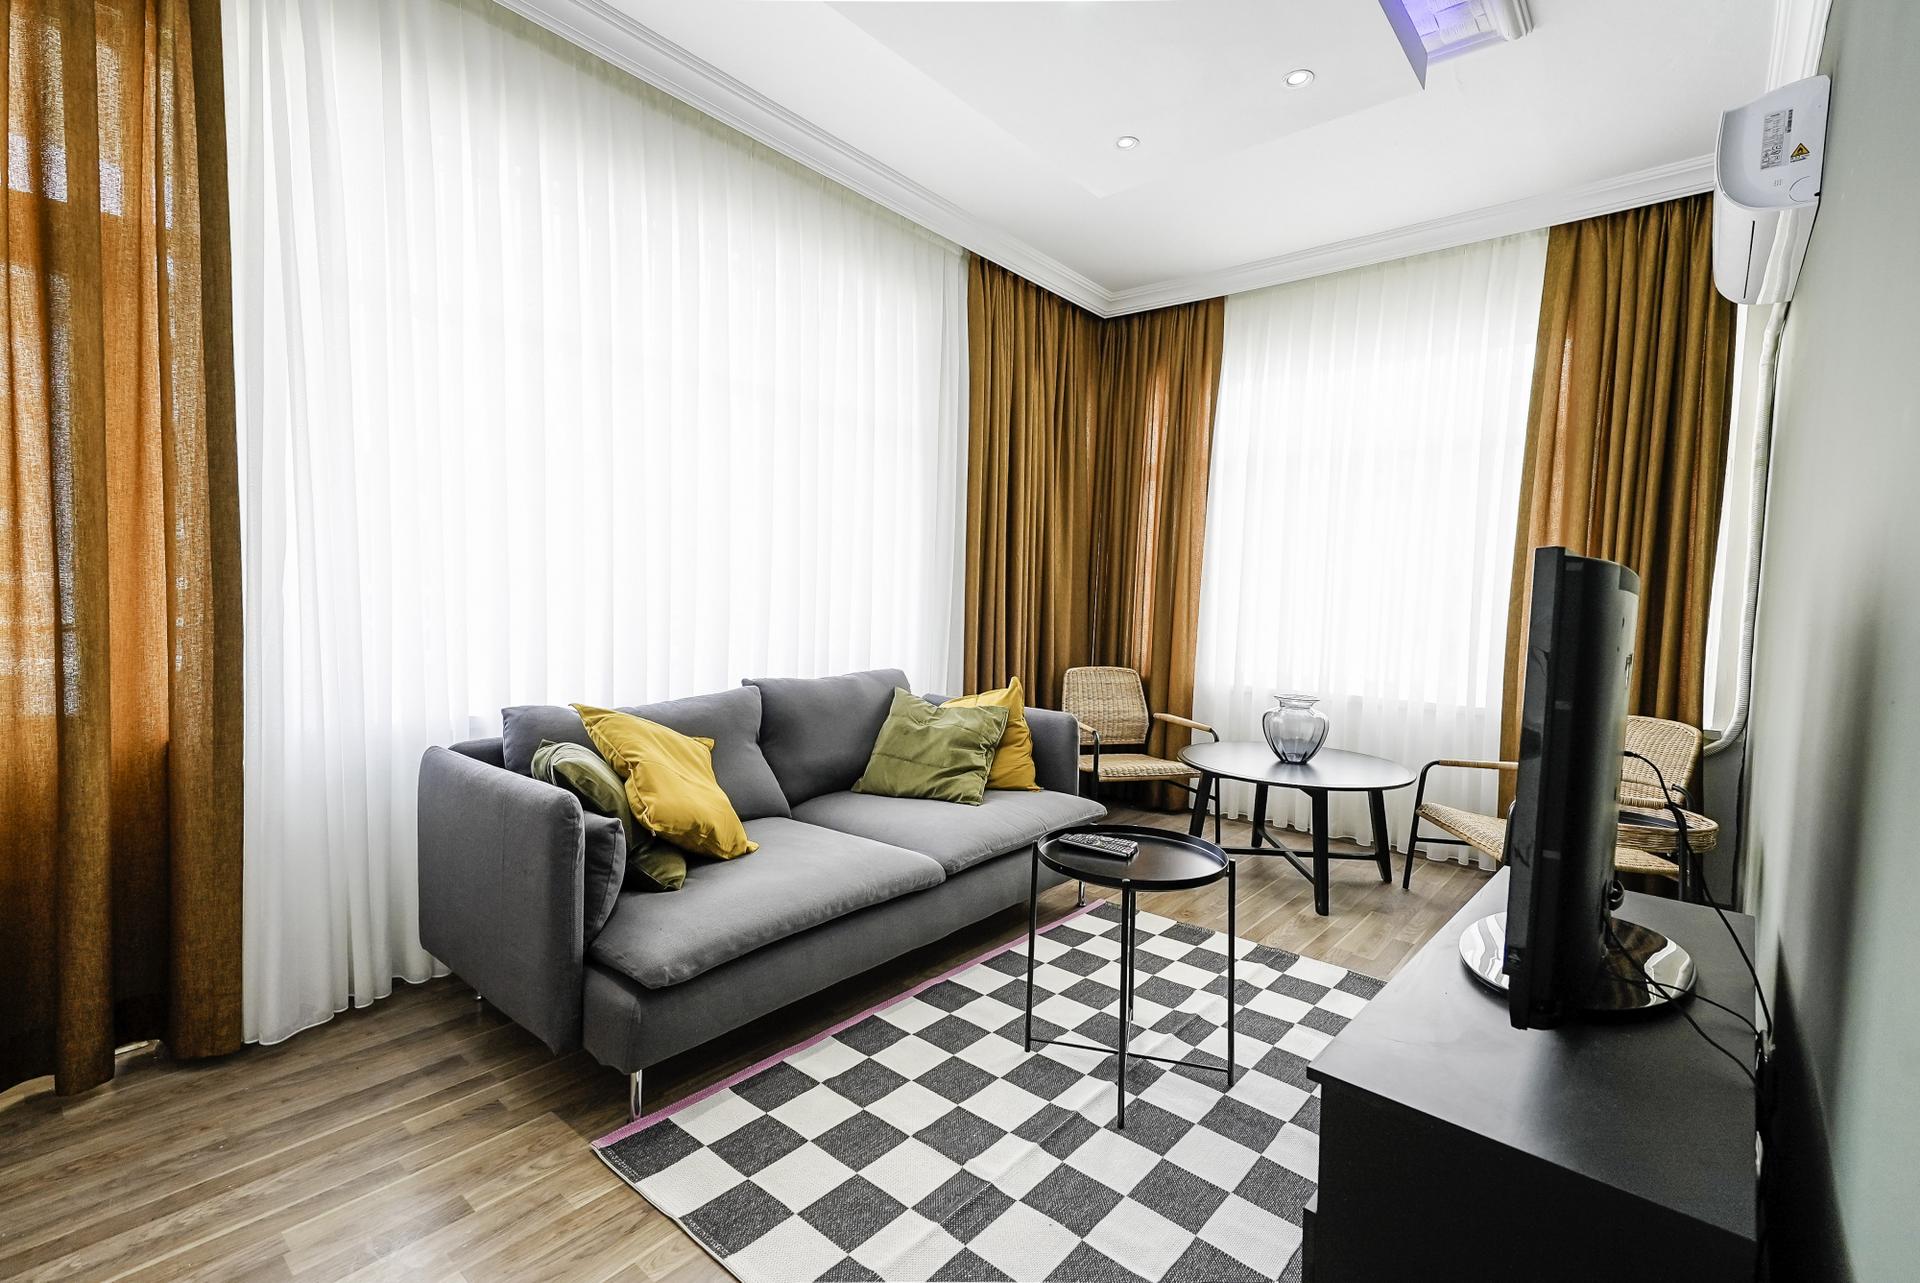 Our elegantly appointed living room is the ideal place to unwind or entertain guests.